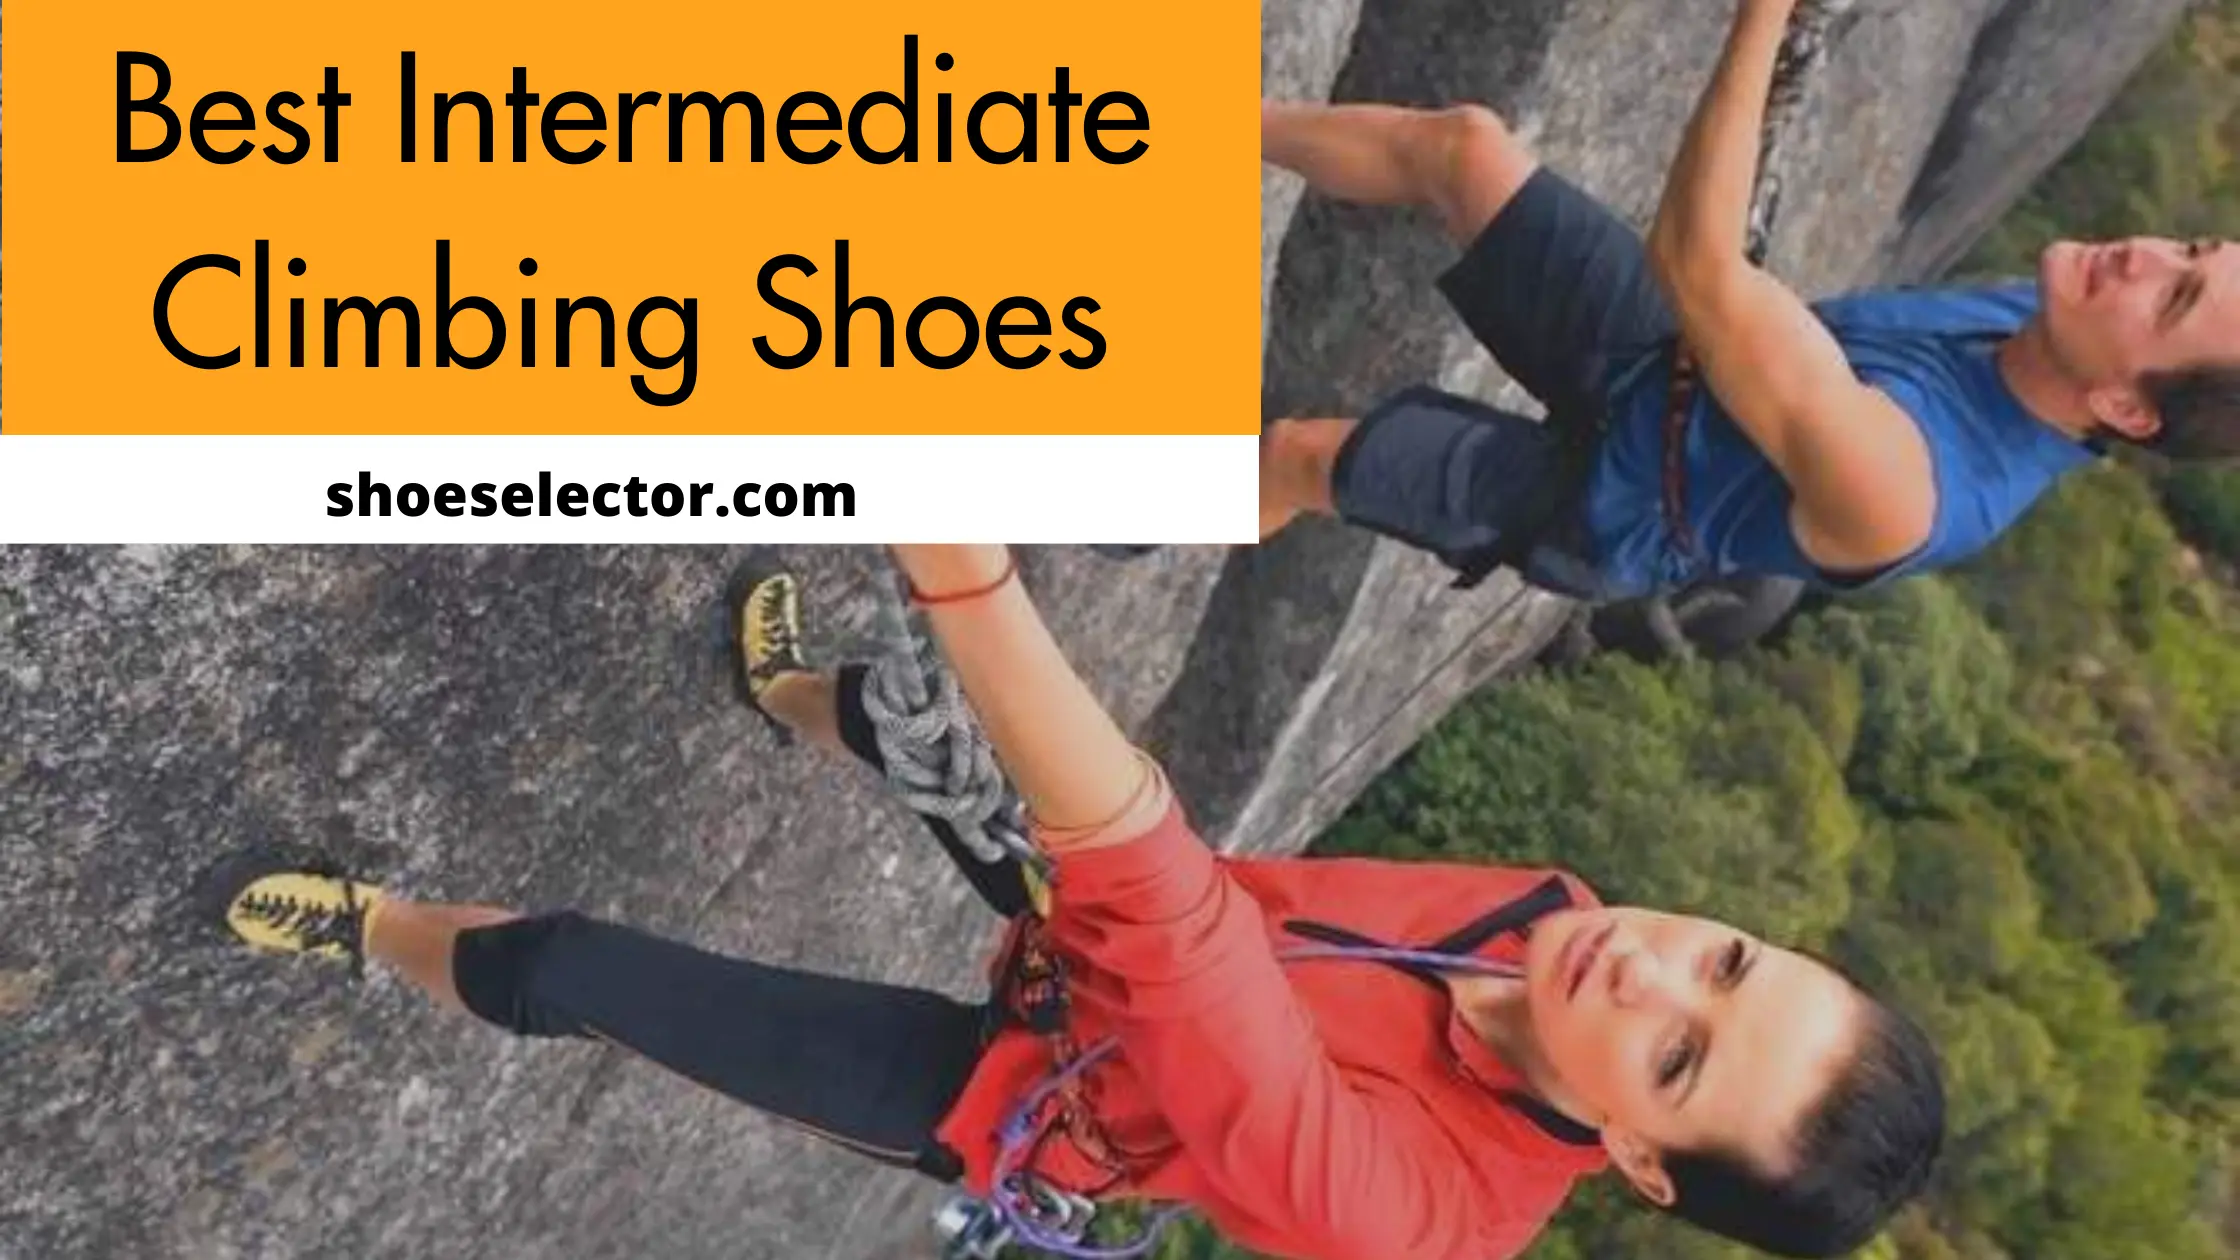 Best Intermediate Climbing Shoes With Complete Guide